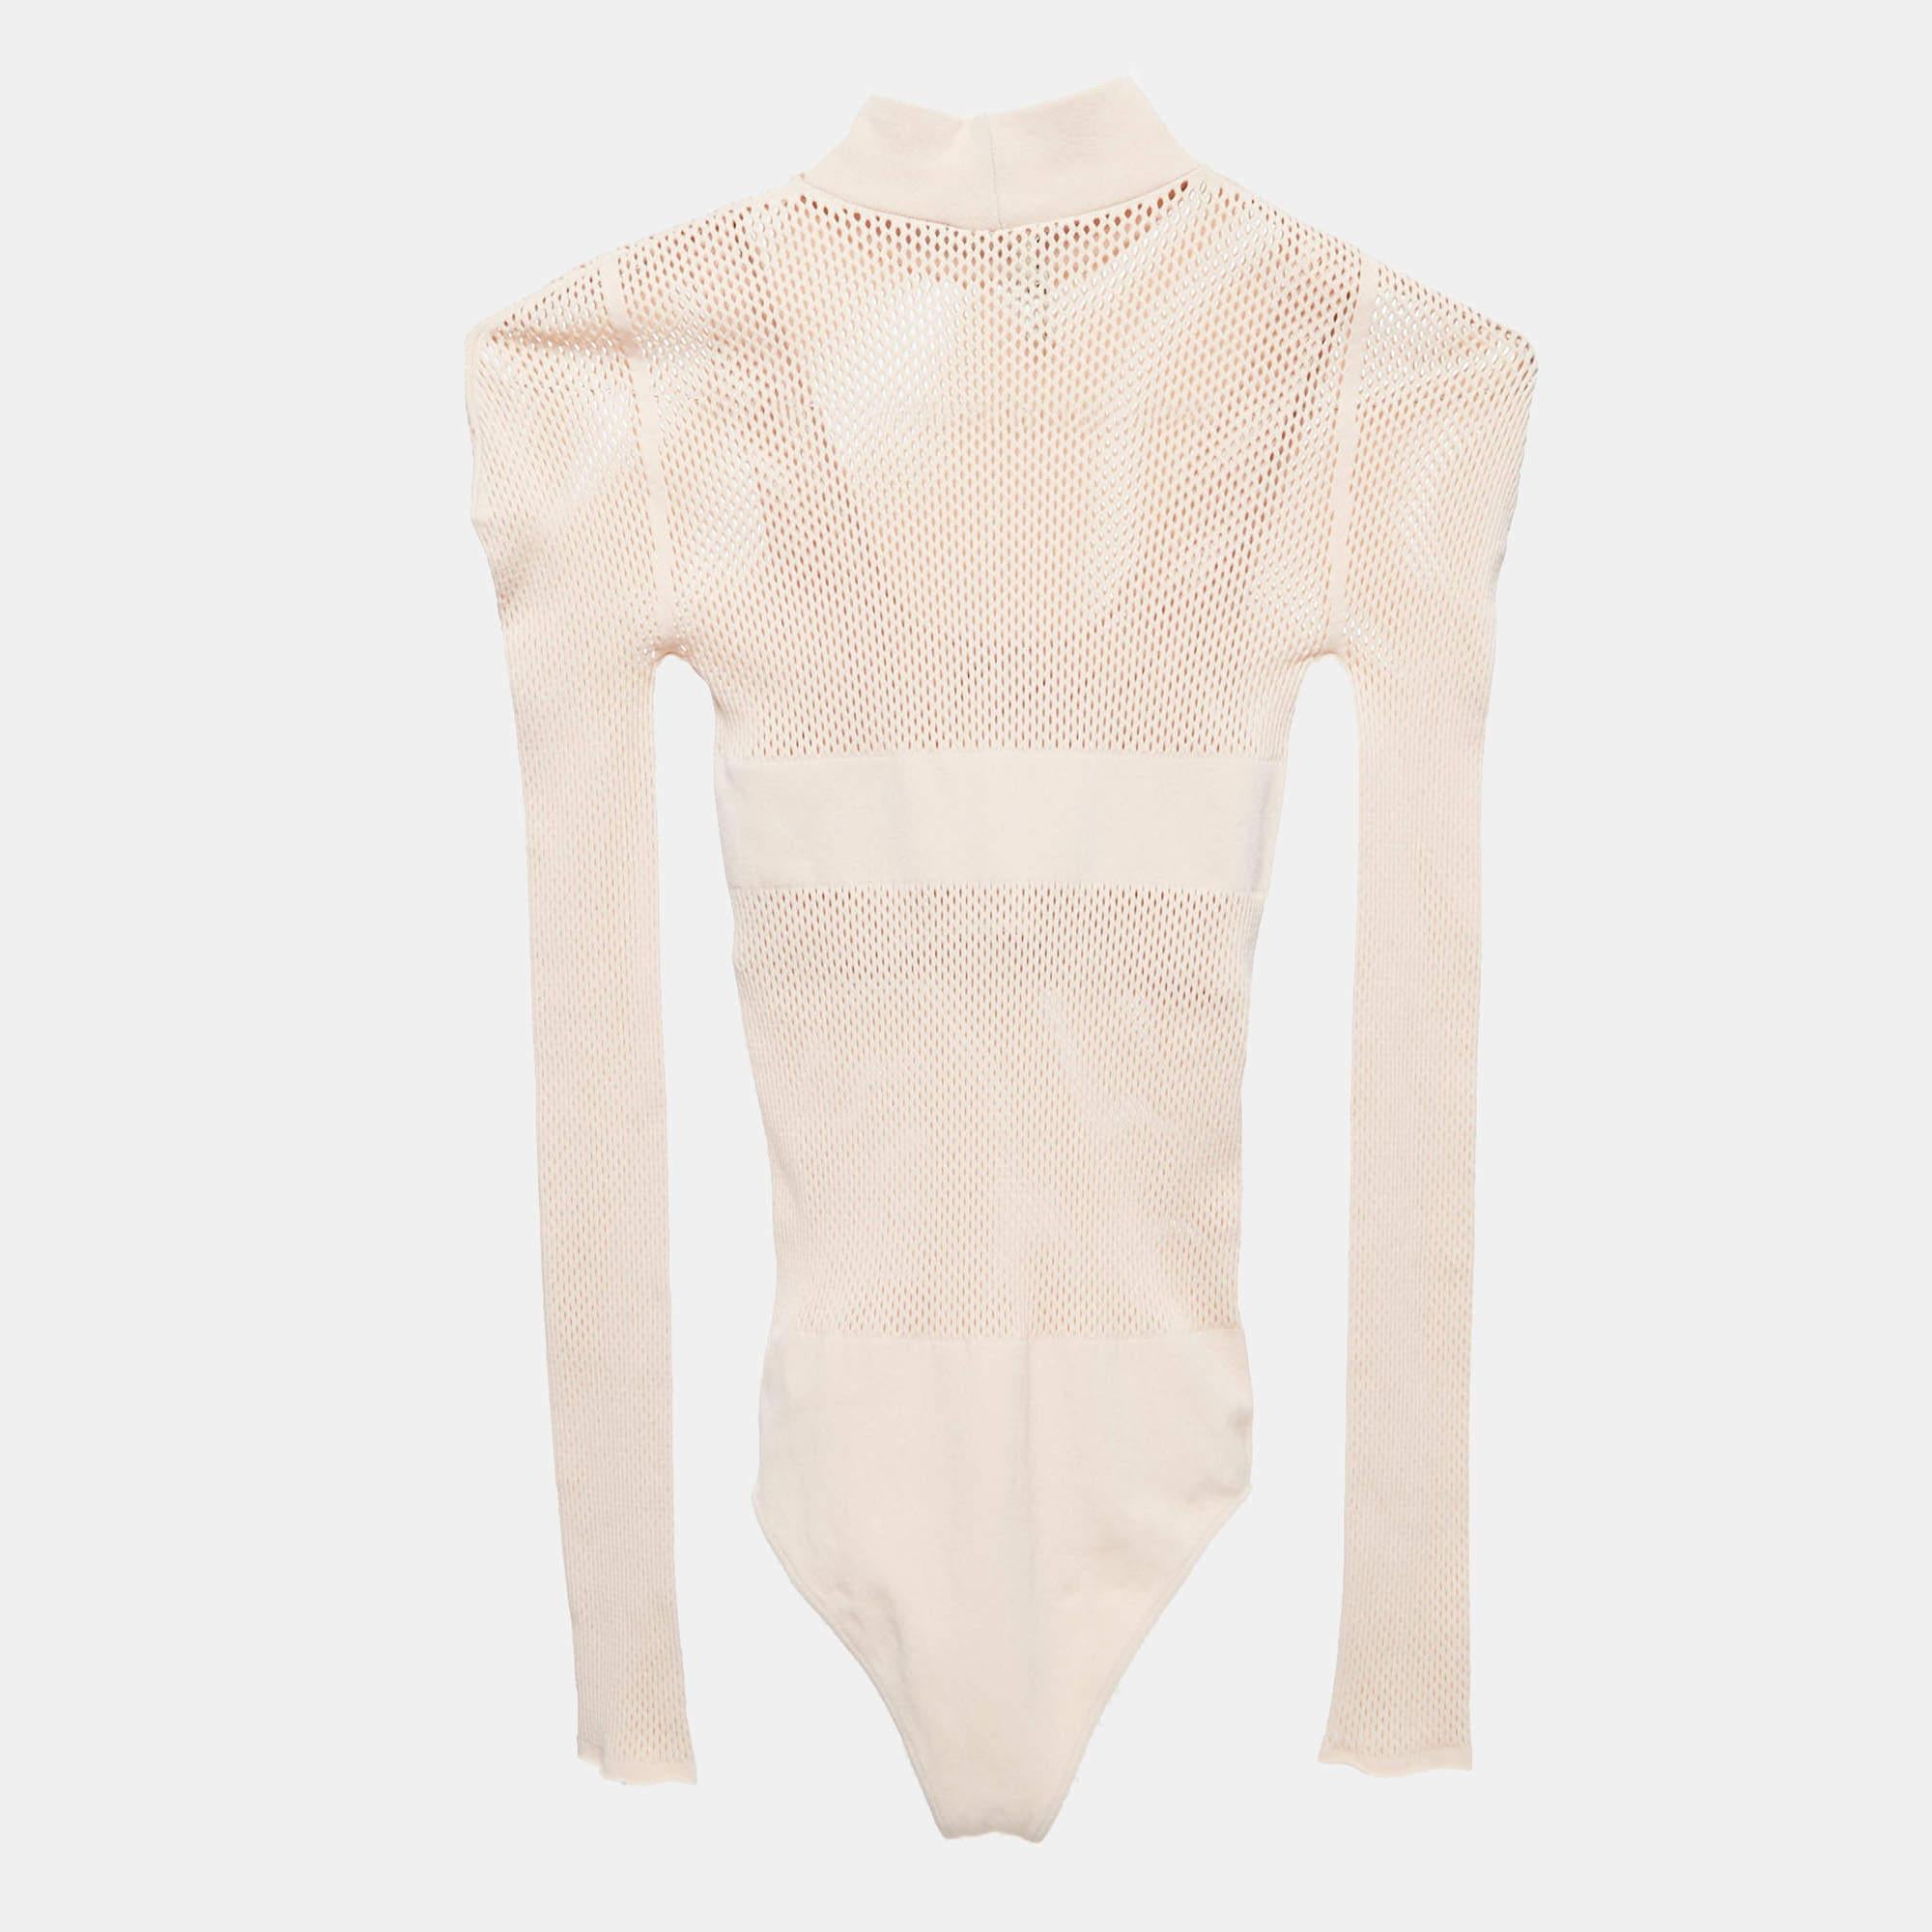 The Fendi bodysuit exudes elegance with its soft, finely woven fabric. The form-fitting silhouette seamlessly blends comfort and style, featuring a delicate knit pattern. This versatile piece effortlessly elevates any wardrobe, embodying Fendi's